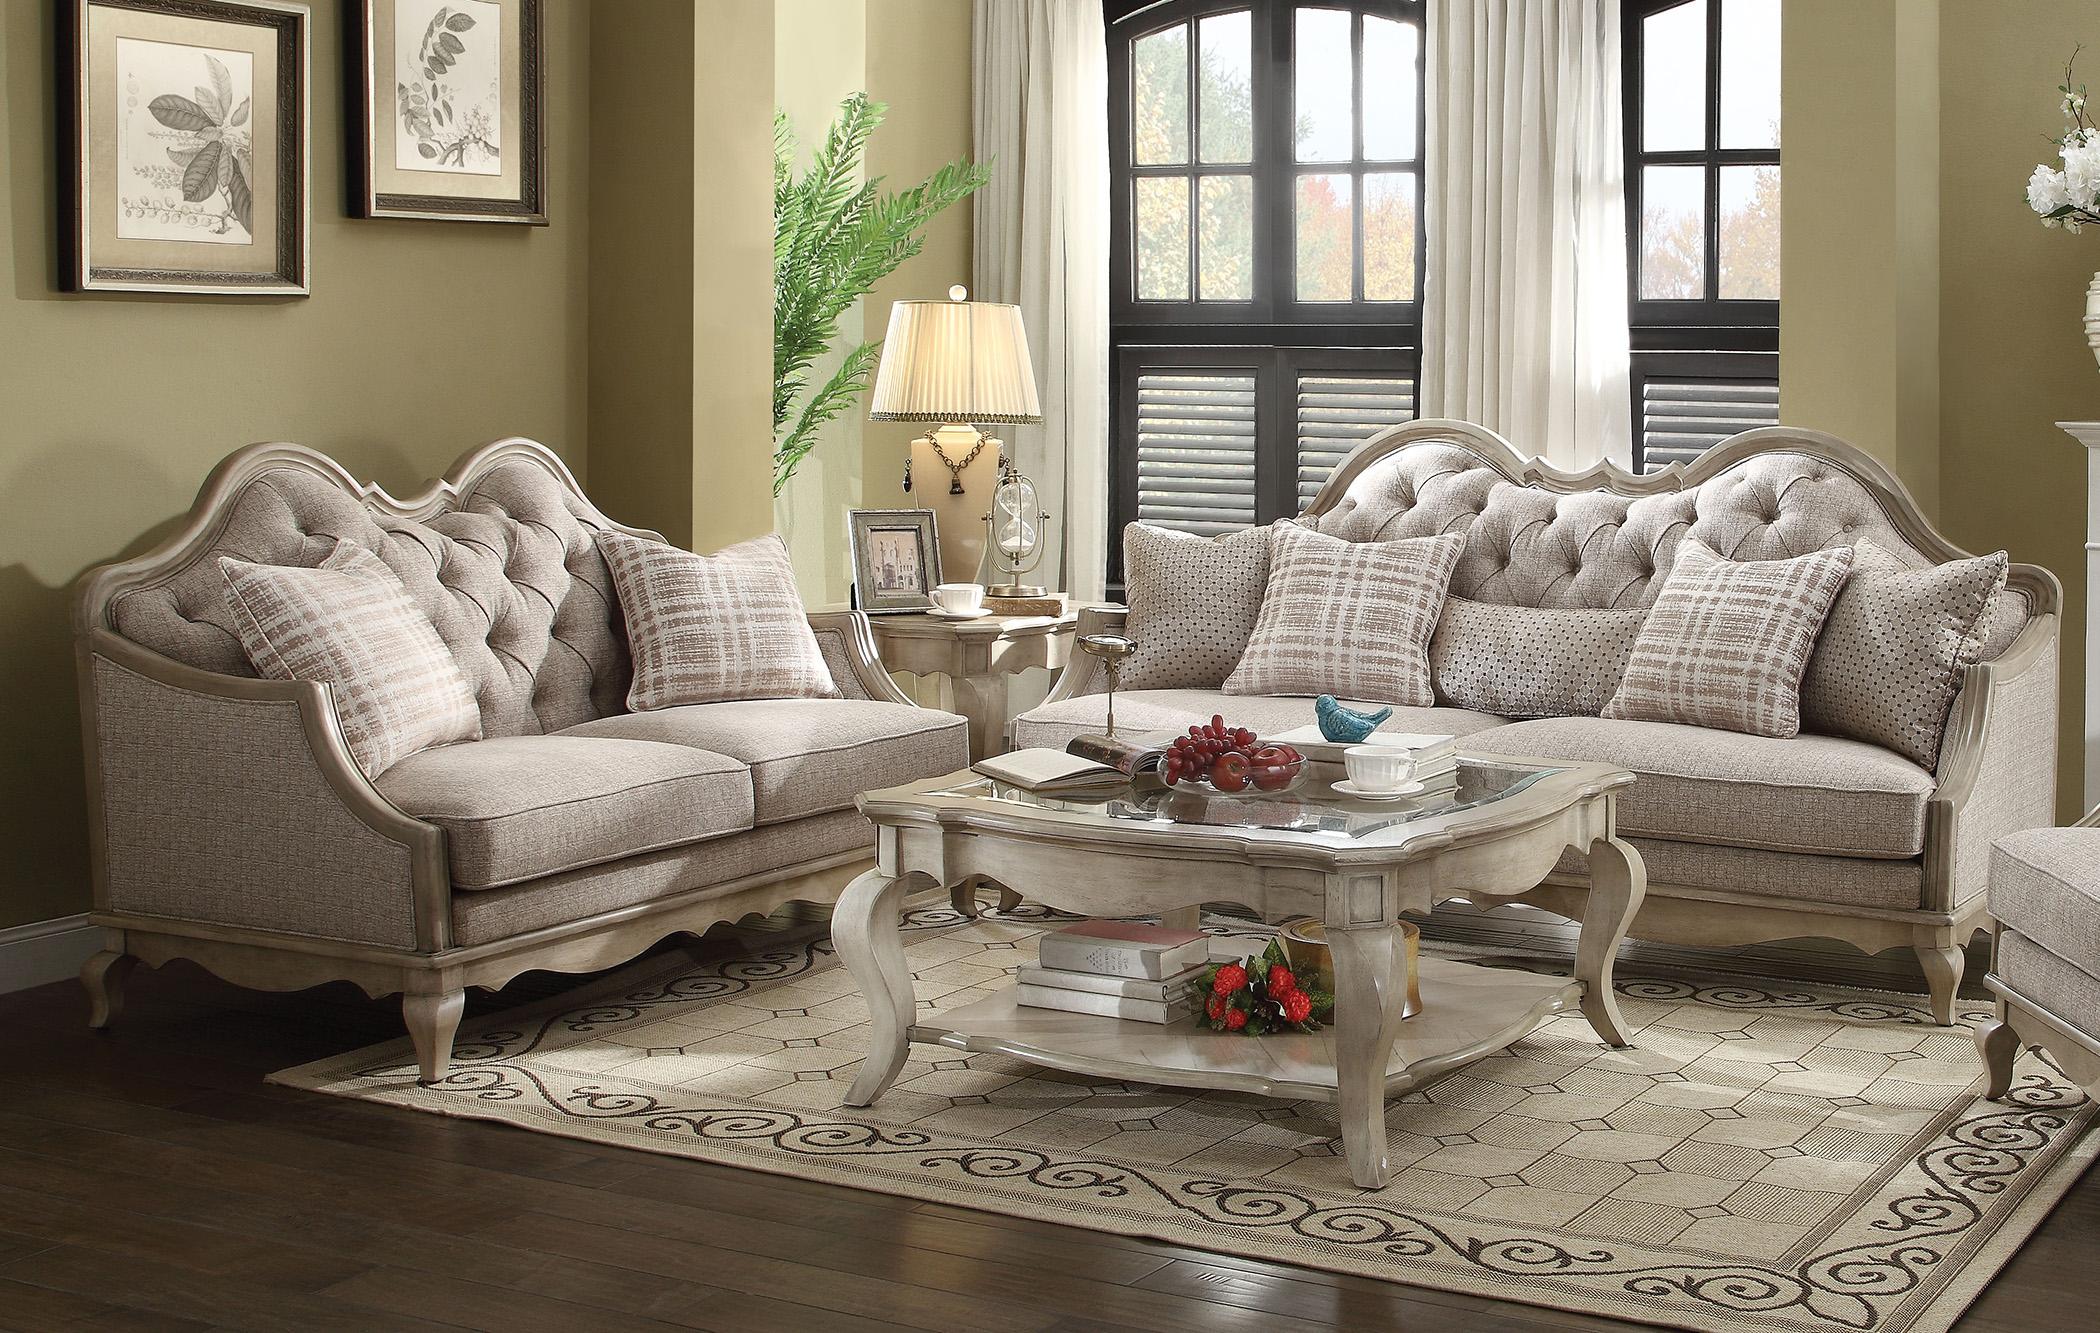 Classic, Traditional Sofa Loveseat Chelmsford-56050 Chelmsford-56050-Set-2 in Taupe, Beige Fabric